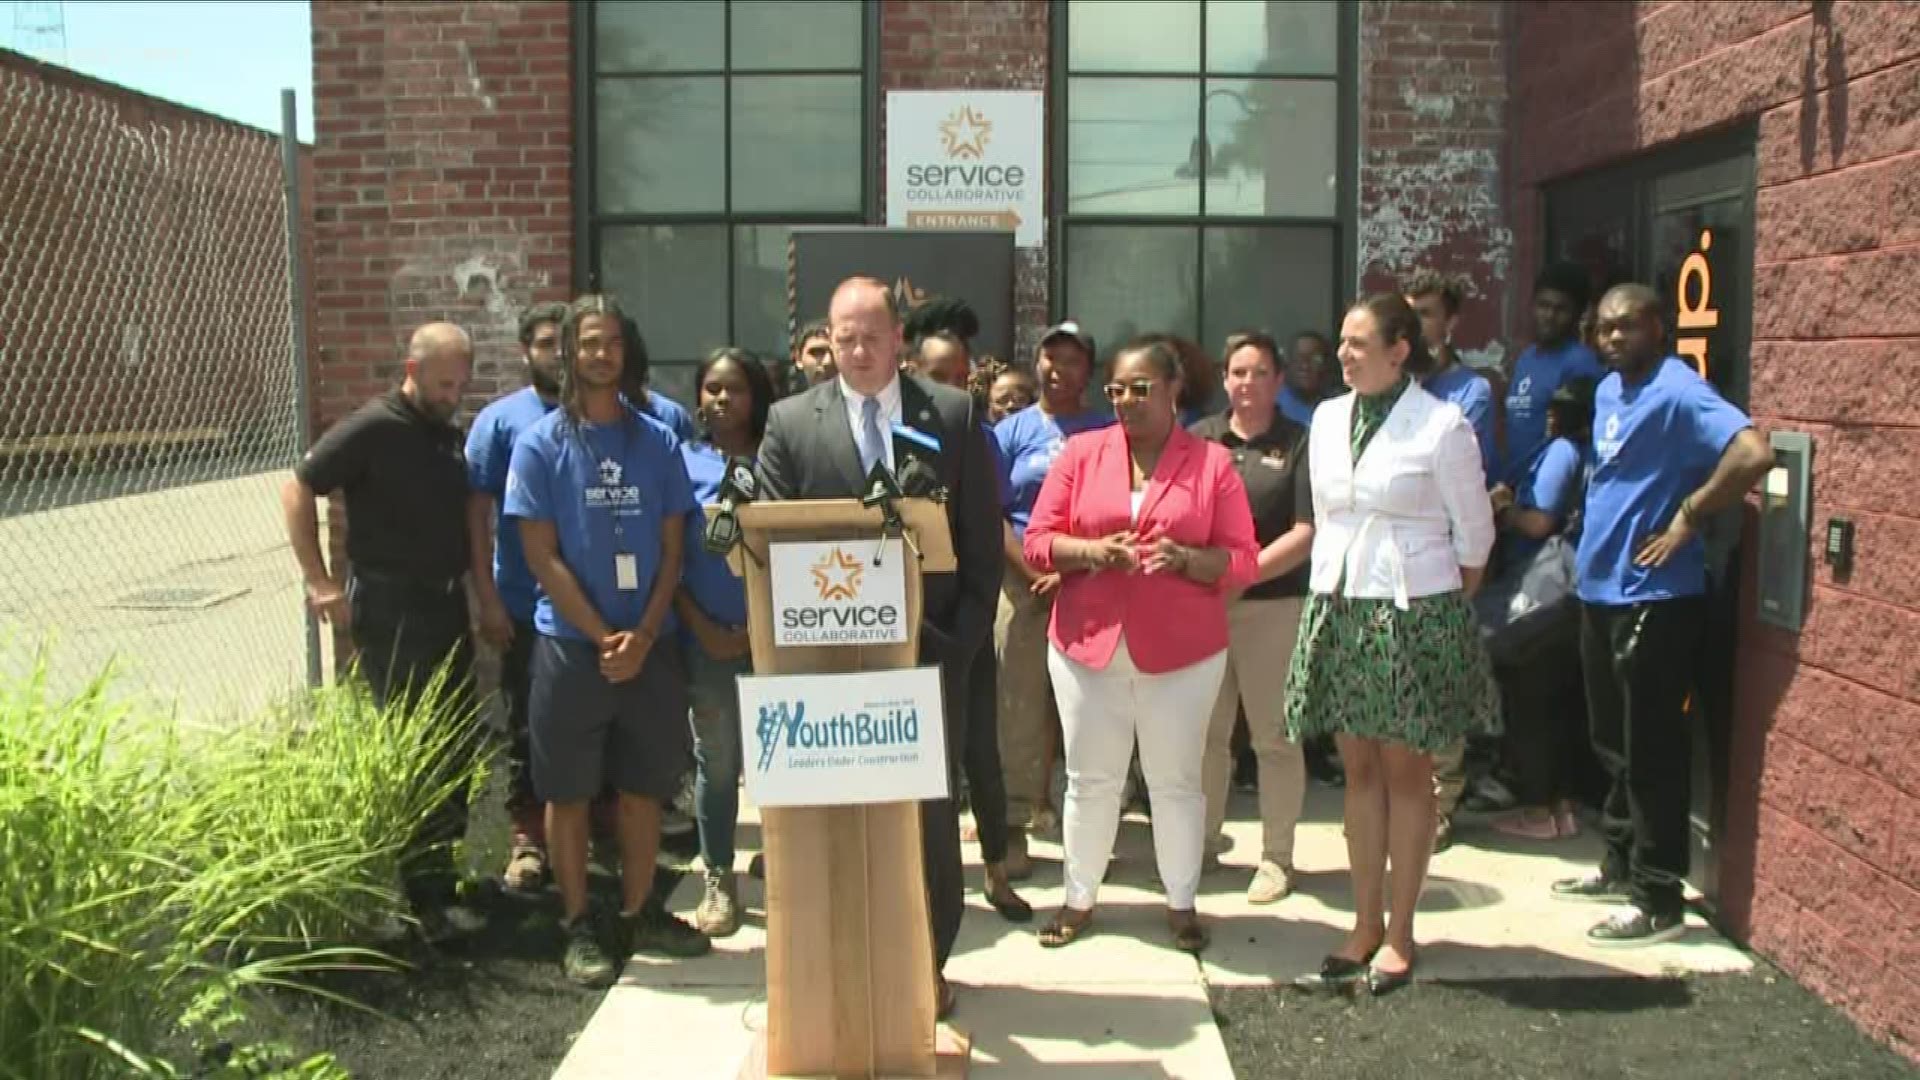 the Service Collaborative will get 300-thousand dollars from the state for the "Youth Build" program.